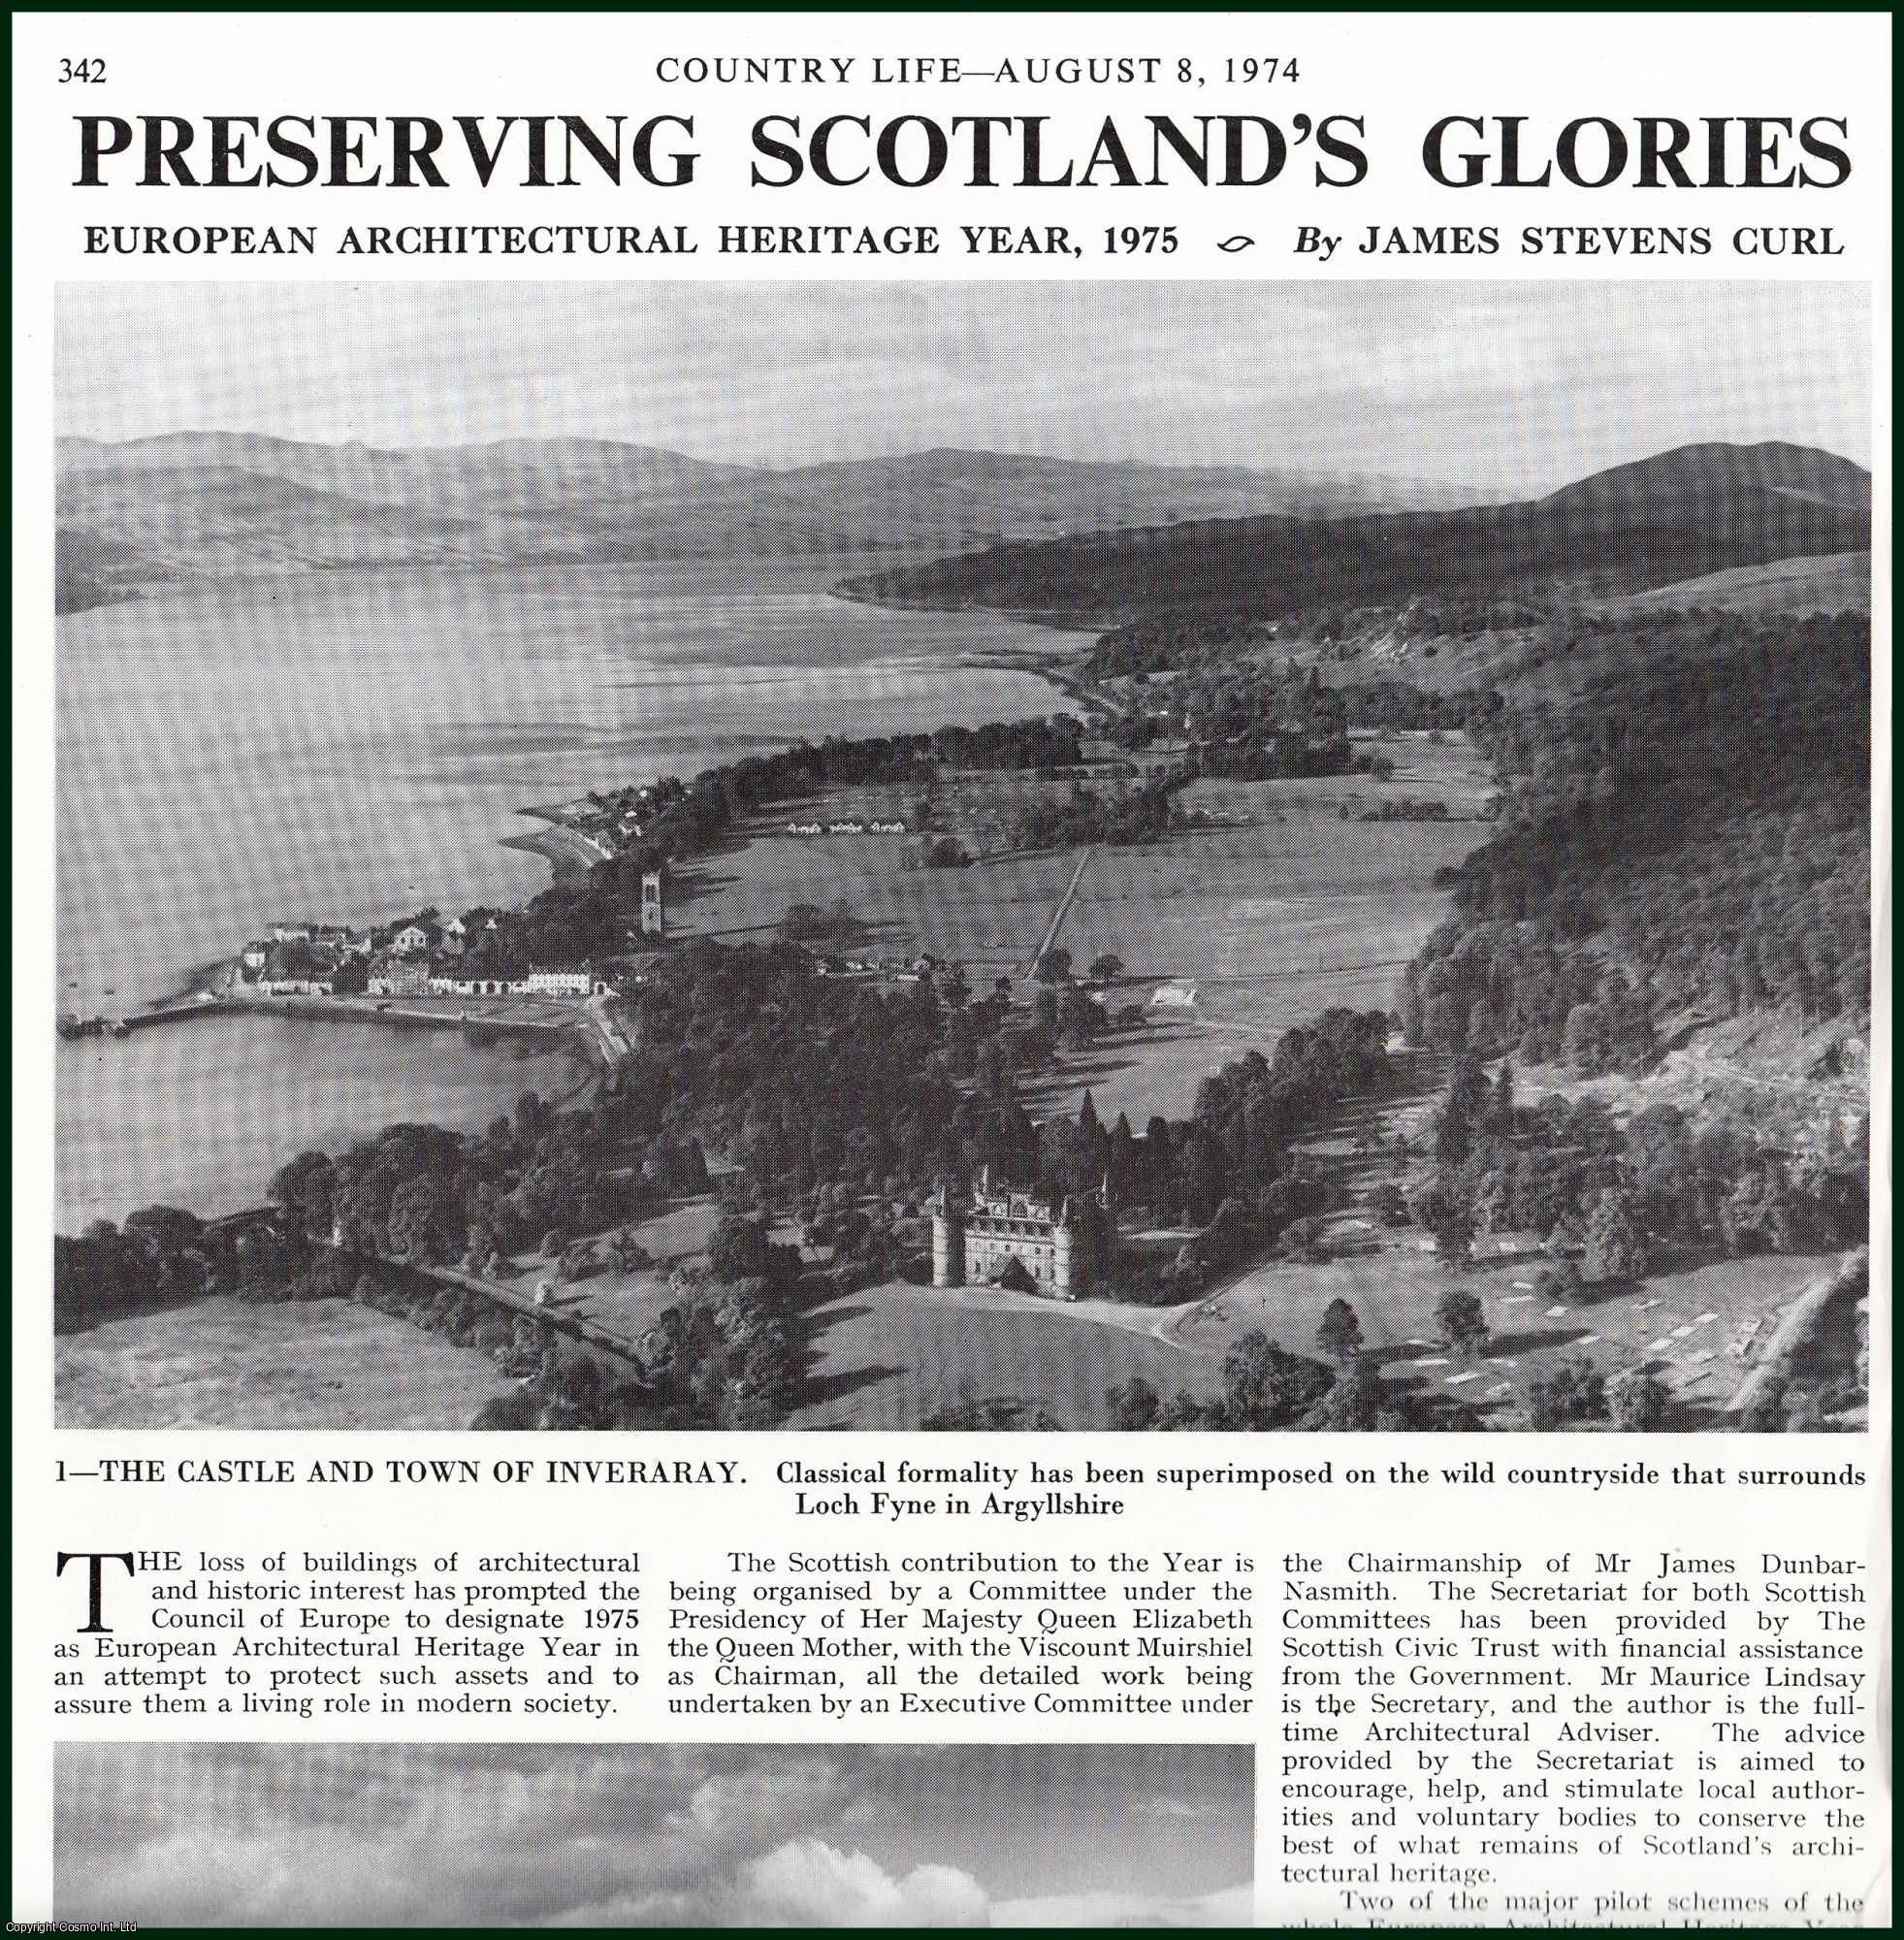 Country Life Magazine - European Architectural Heritage Year, 1975 : Preserving Scotland's Glories. Several pictures and accompanying text, removed from an original issue of Country Life Magazine, 1974.